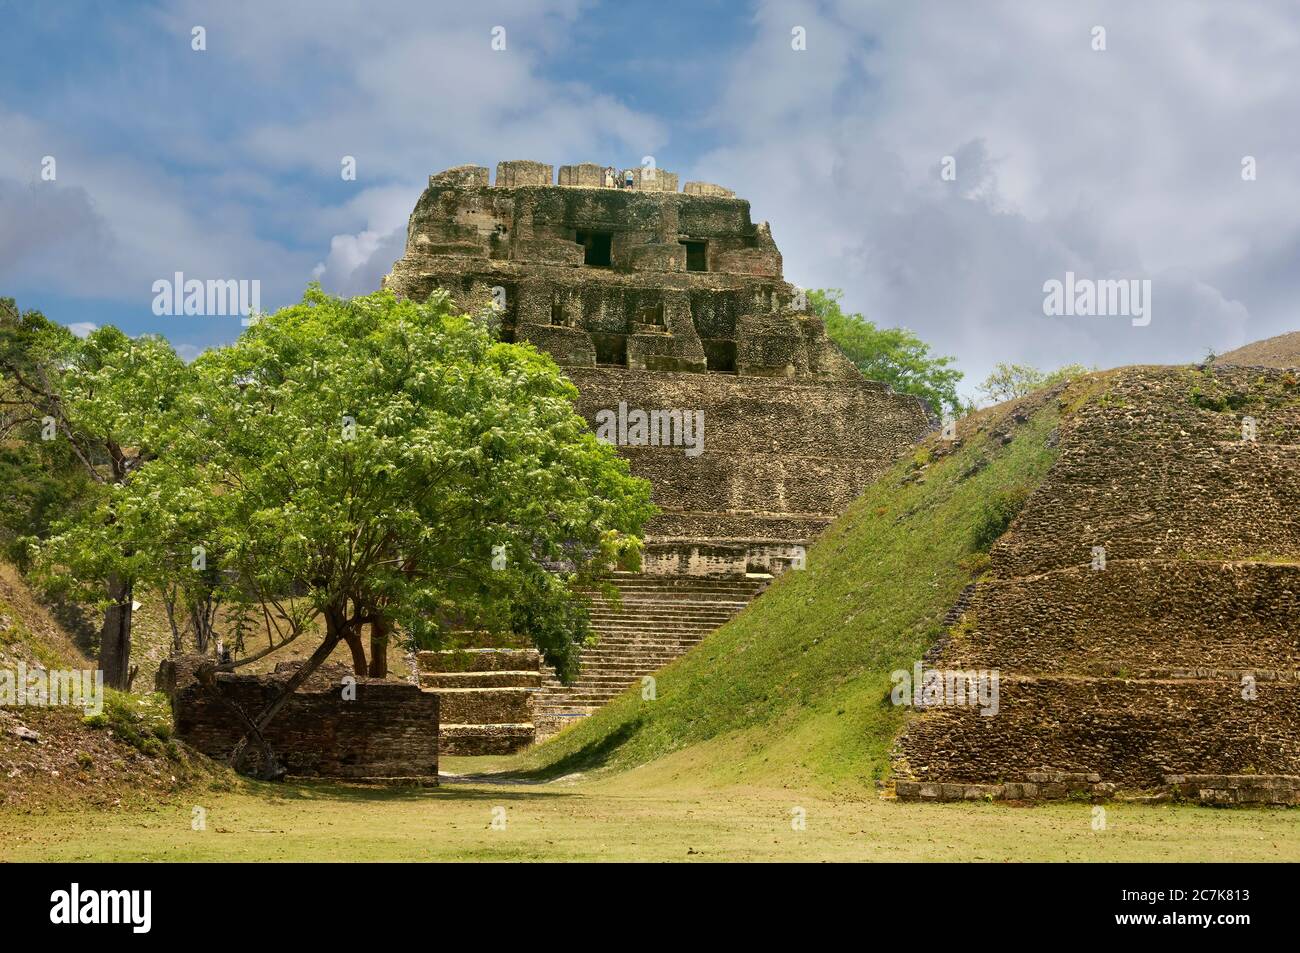 Cayo, Belize - May 14, 2011: The Mayan ruins of Xunantunich near the Cayo district of Belize. Stock Photo